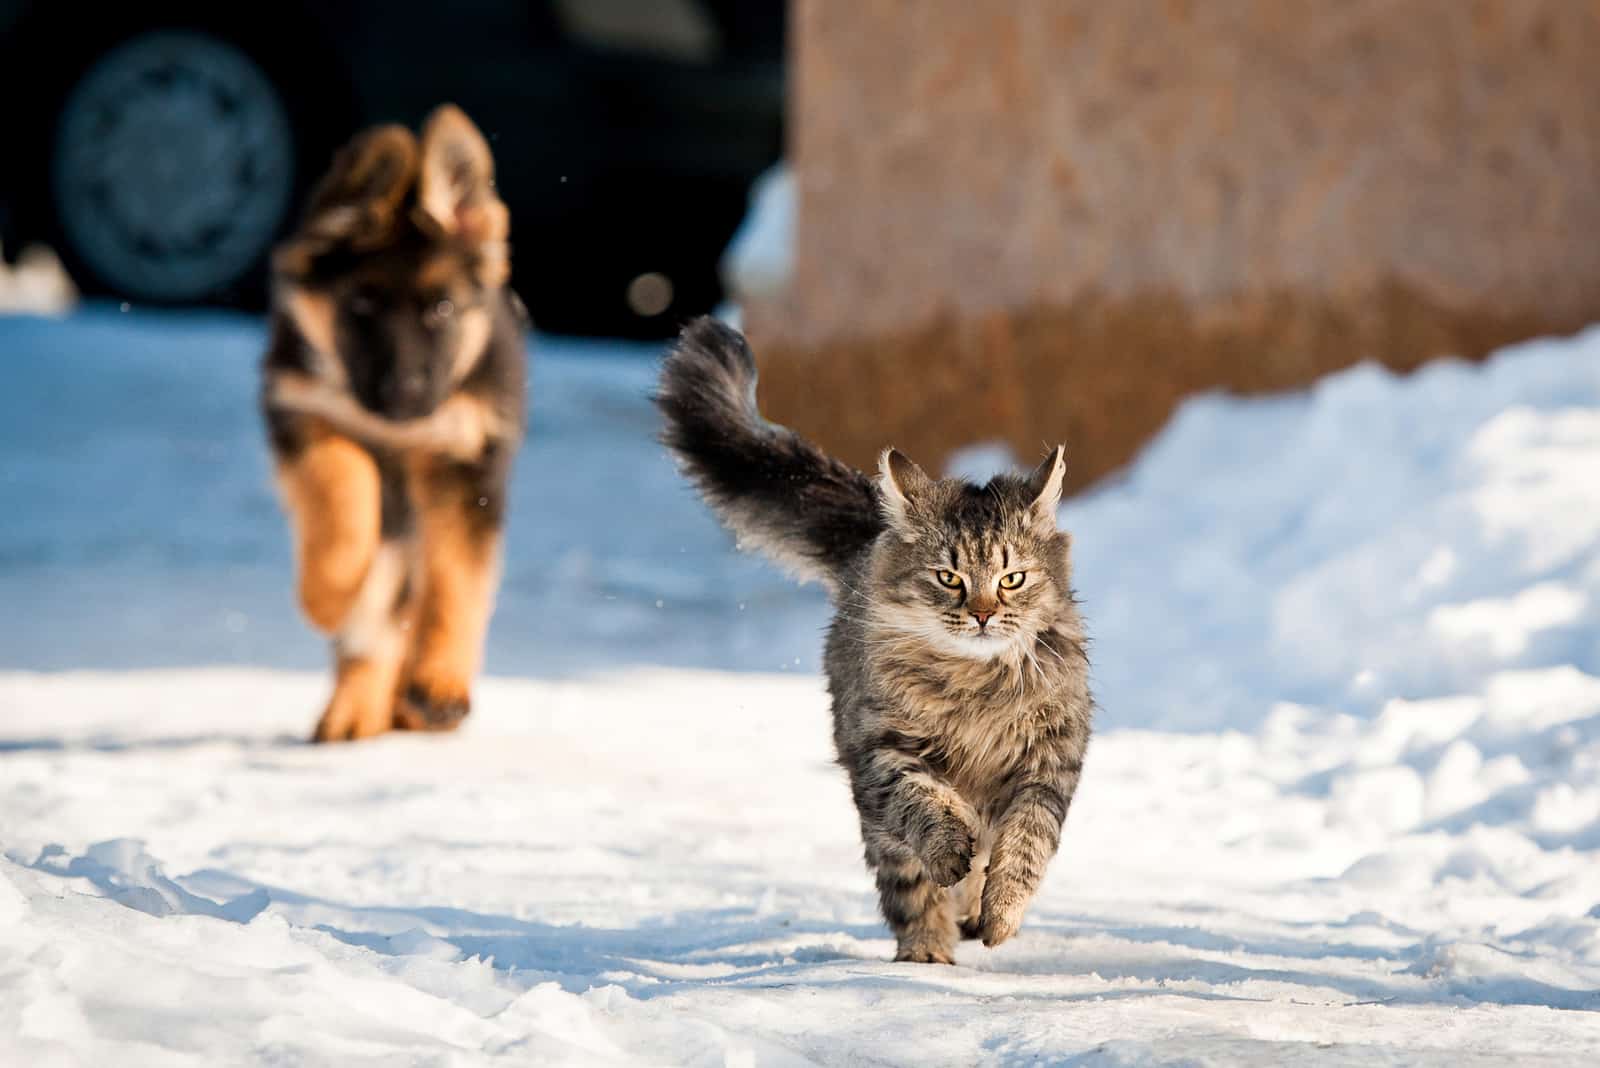 a German Shepherd puppy chases a cat